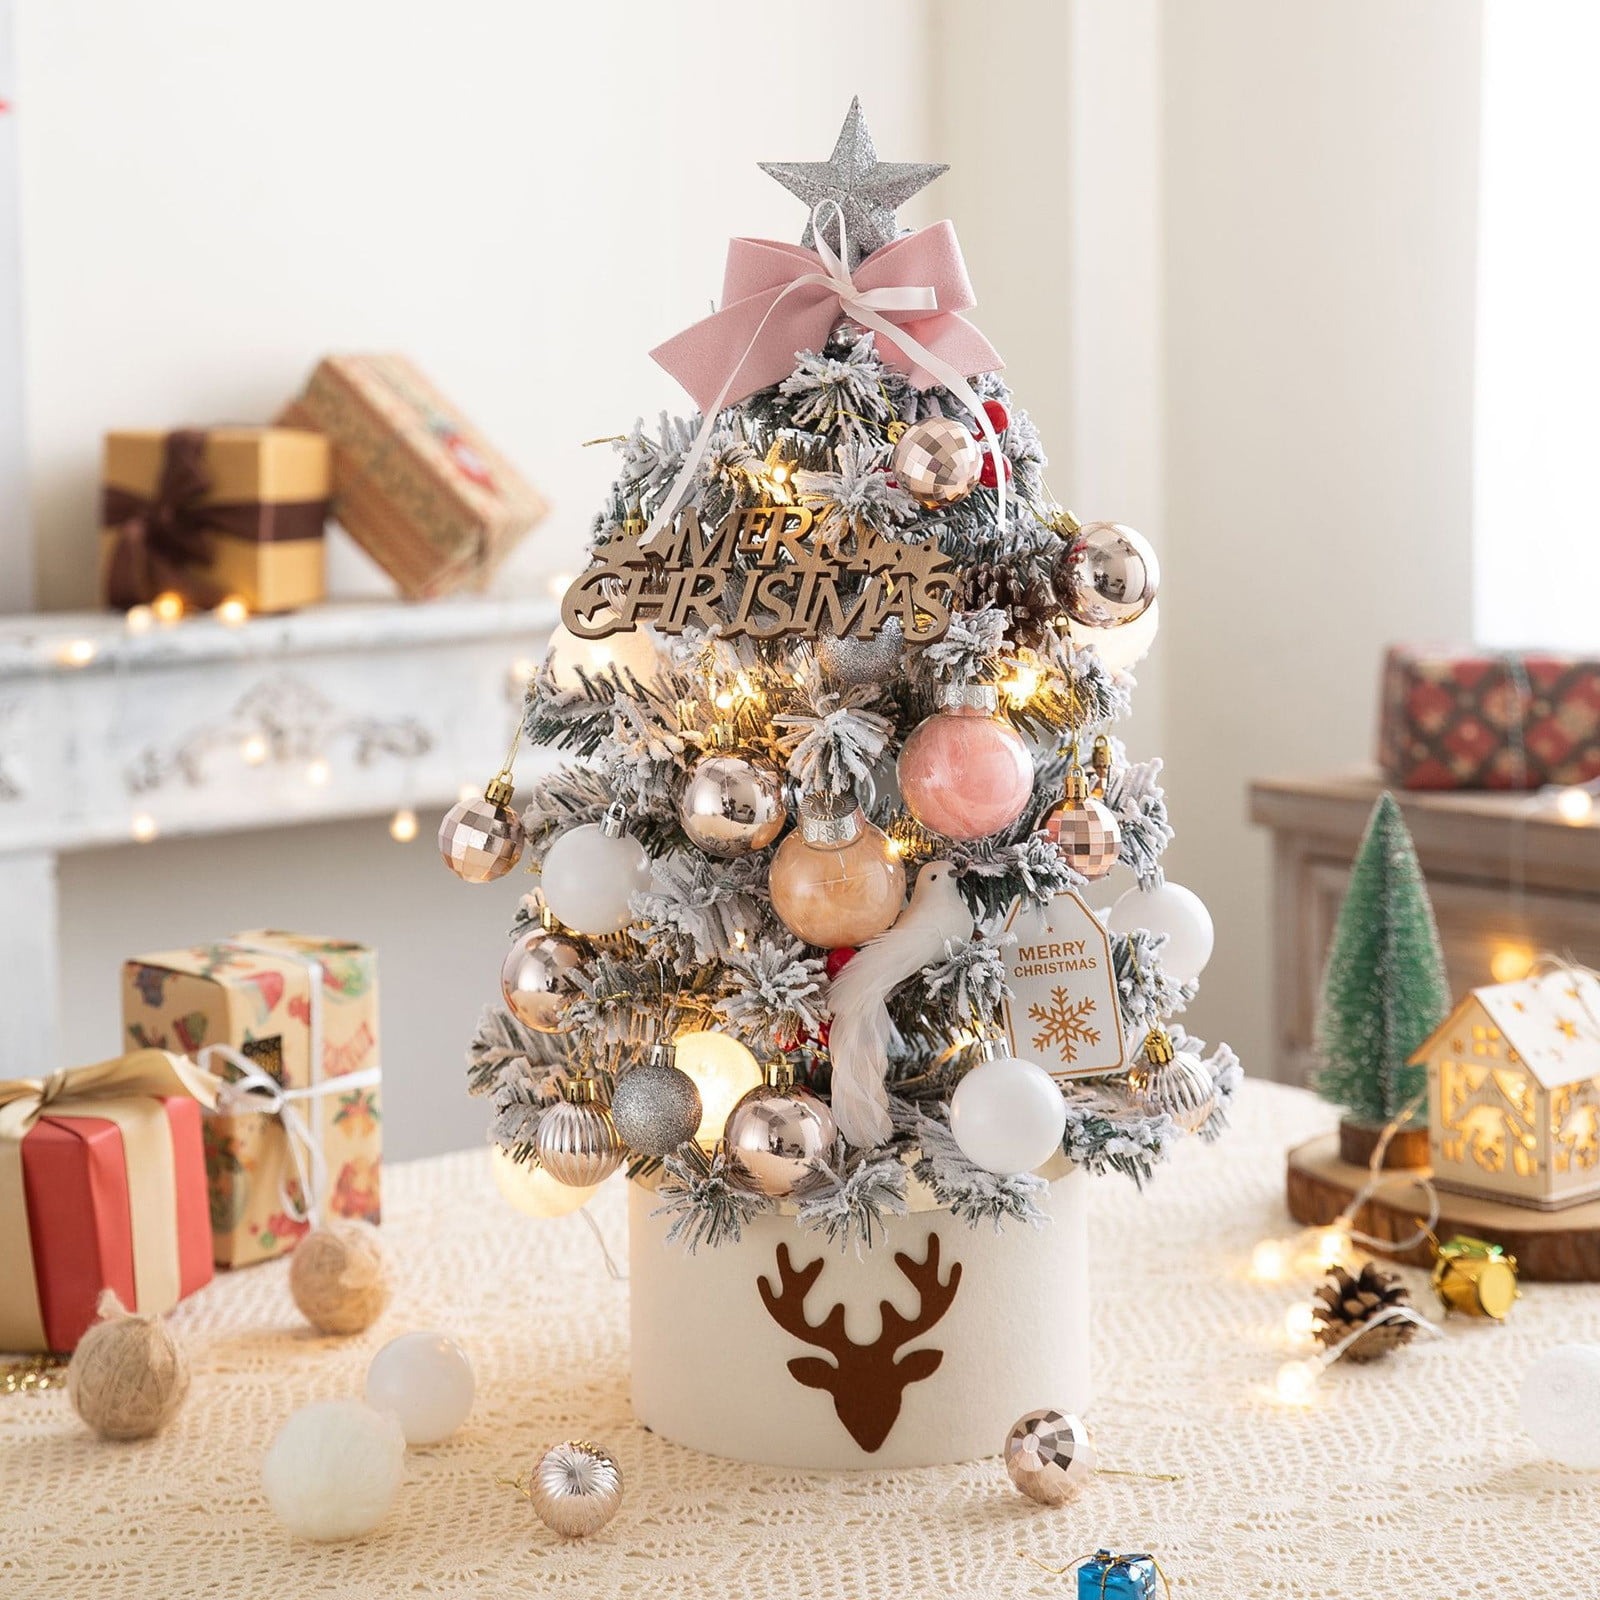 Add a Fashionable Twist to Your Holidays with Iconic Tree Toppers